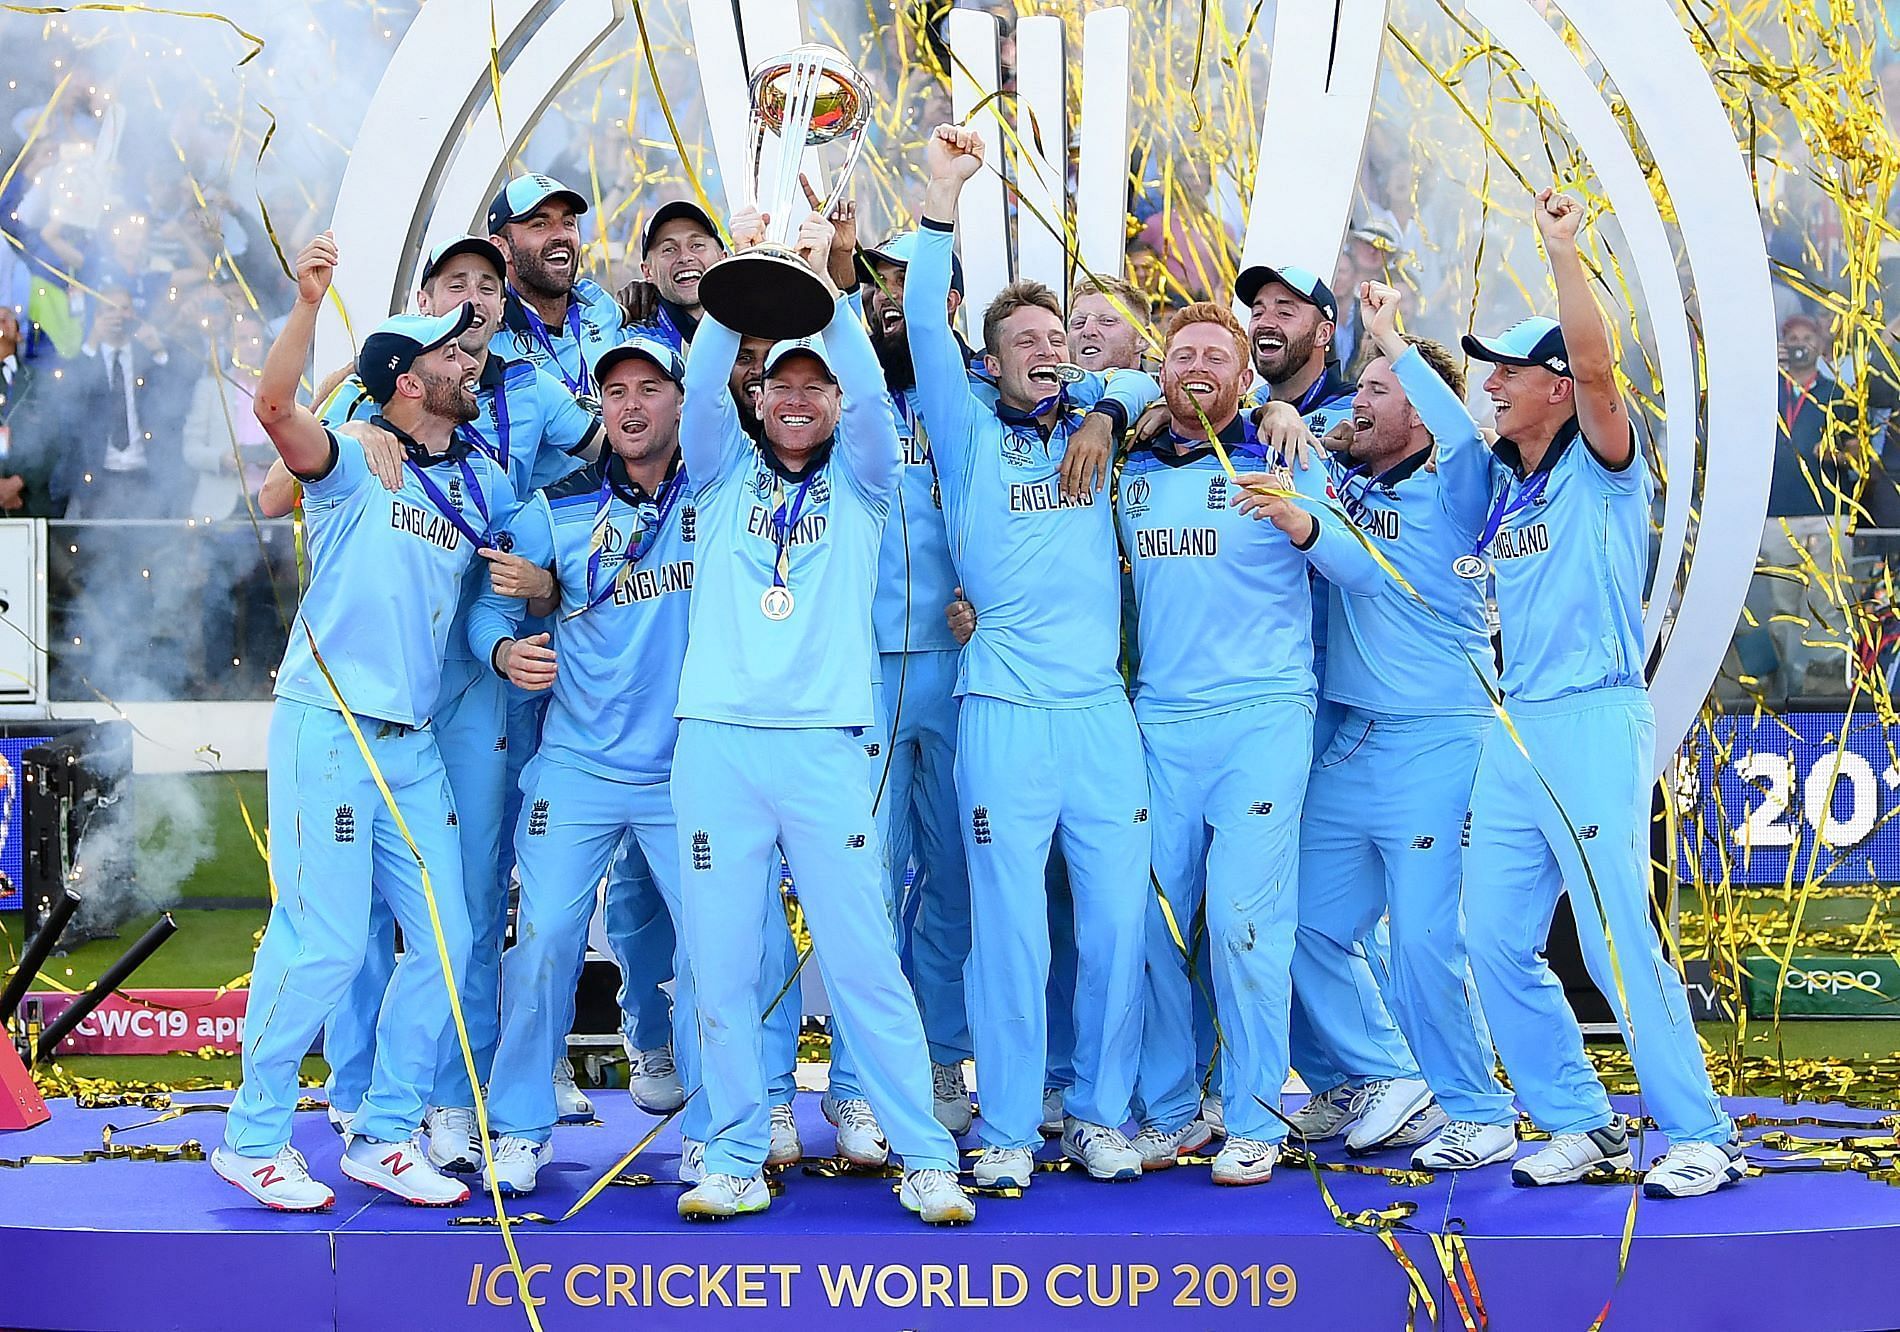 England emerged victorious in arguably the most dramatic World Cup final in cricket history